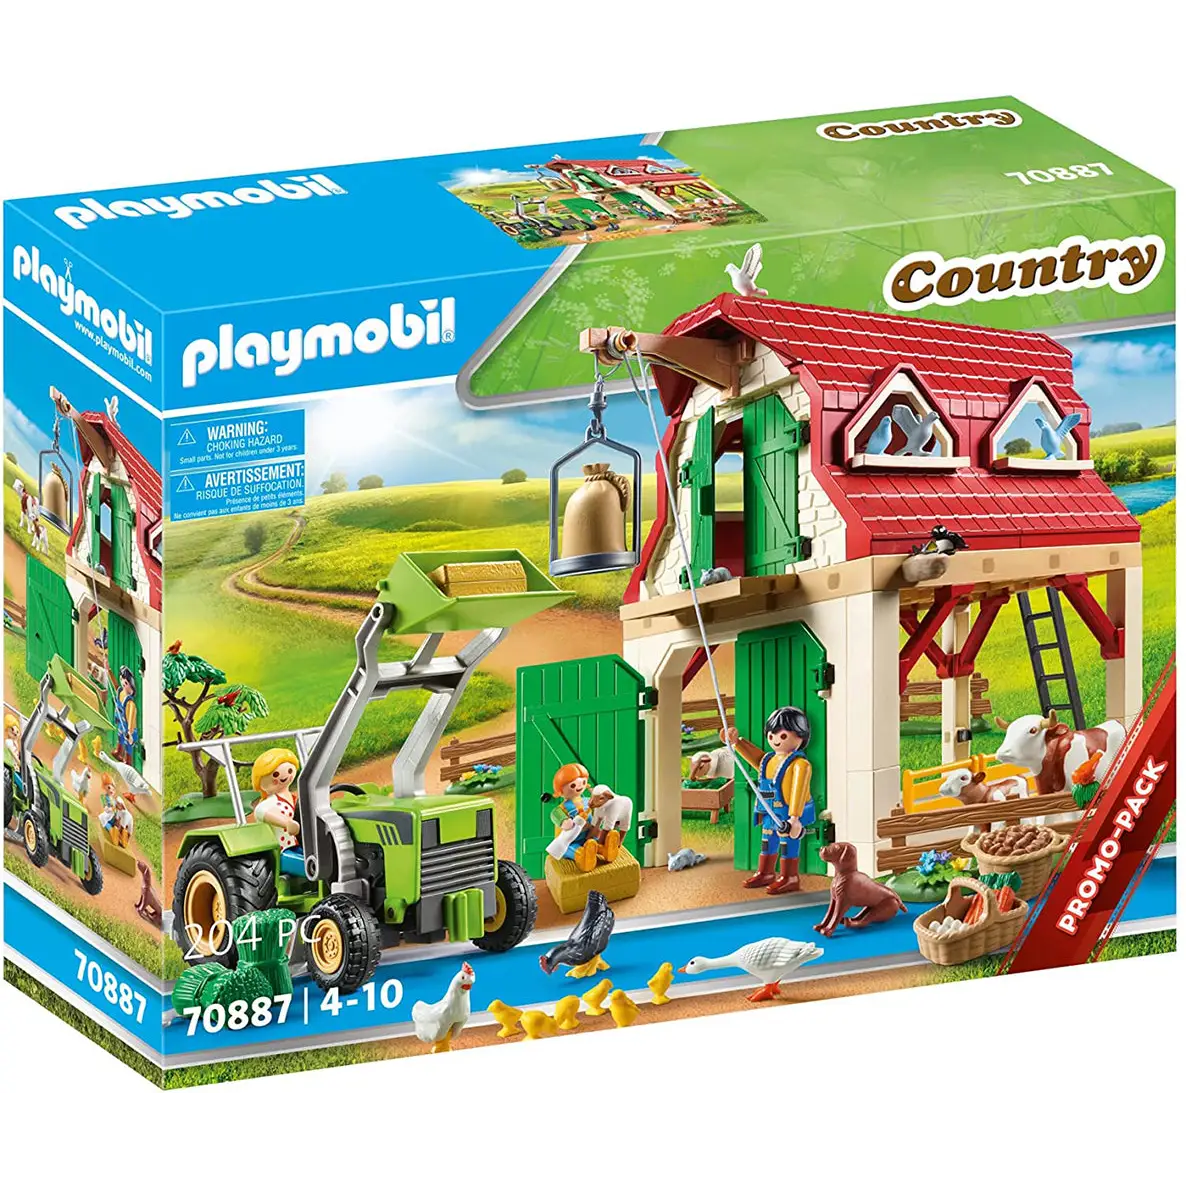 Playmobil Country - Farm with Small Animals 70887 (Kids 4